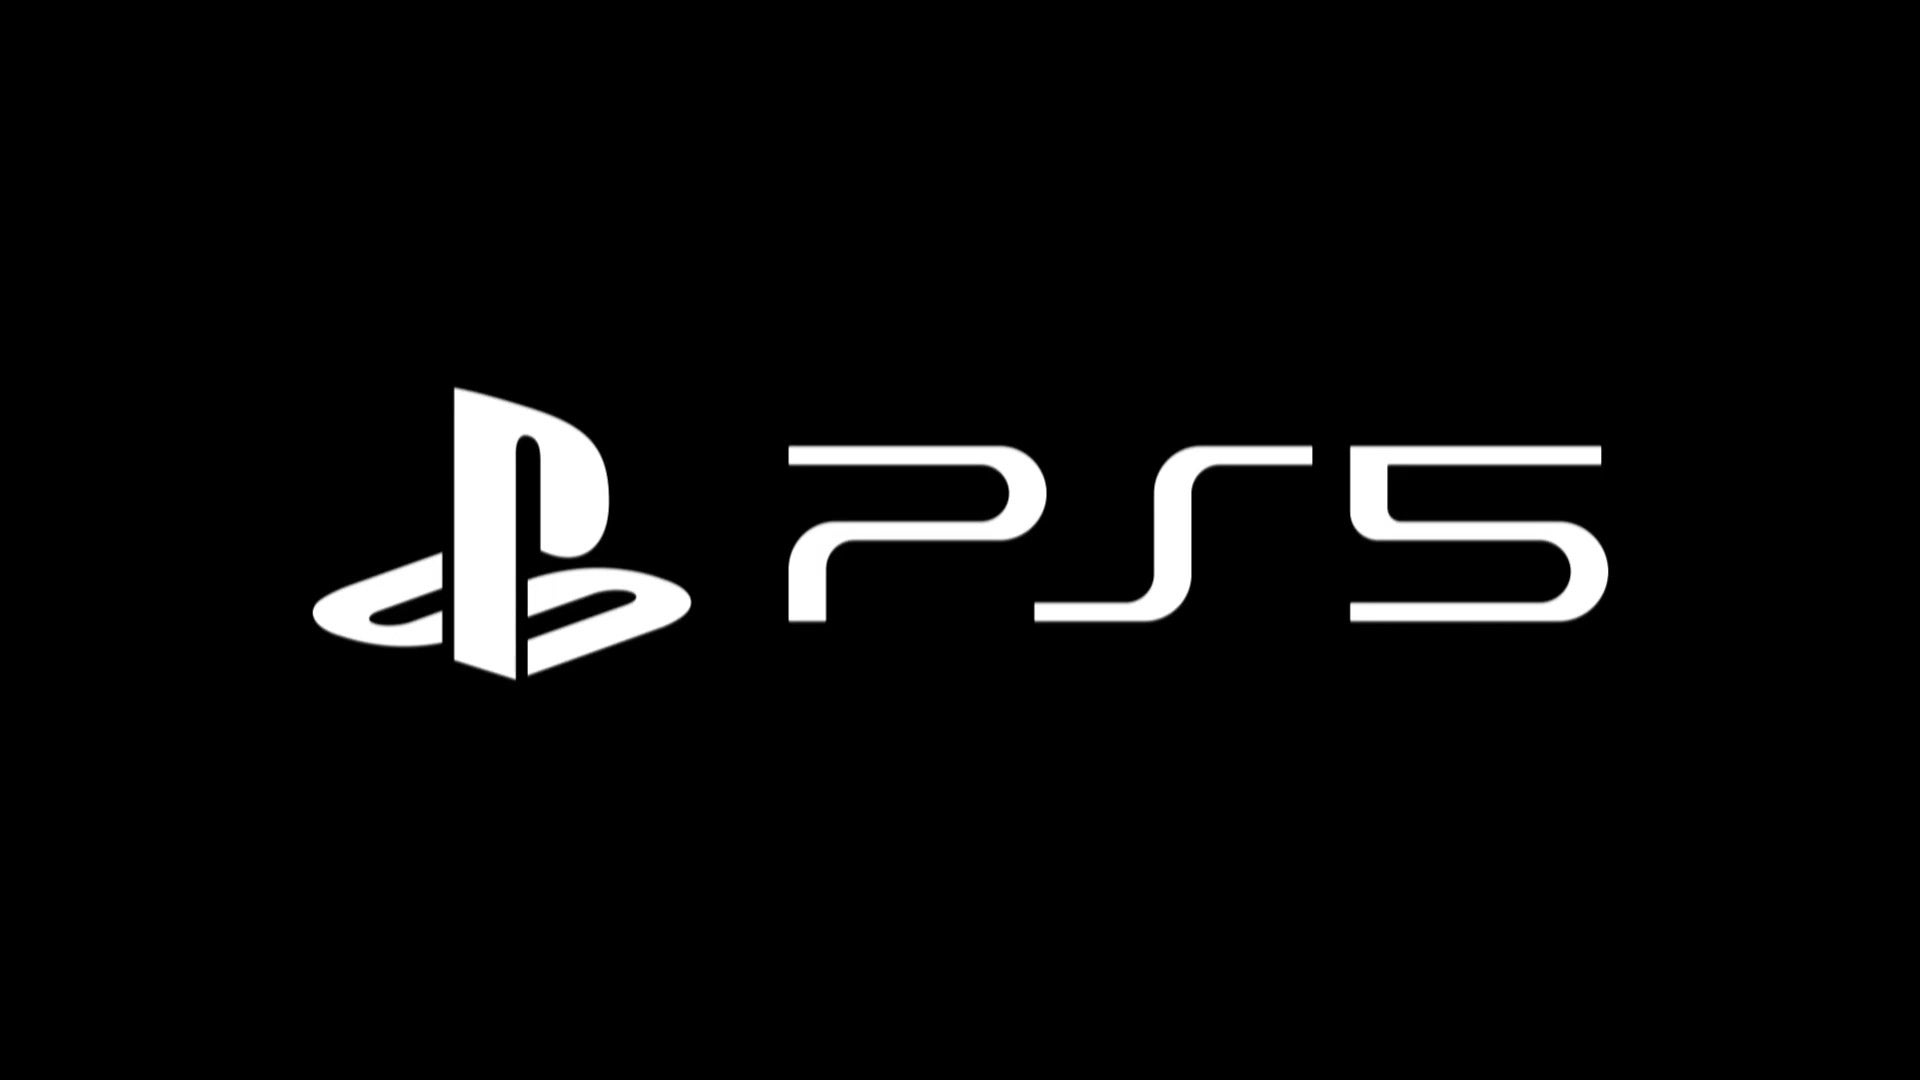 Sony reveals the official PS5 logo during CES 2020 VG247